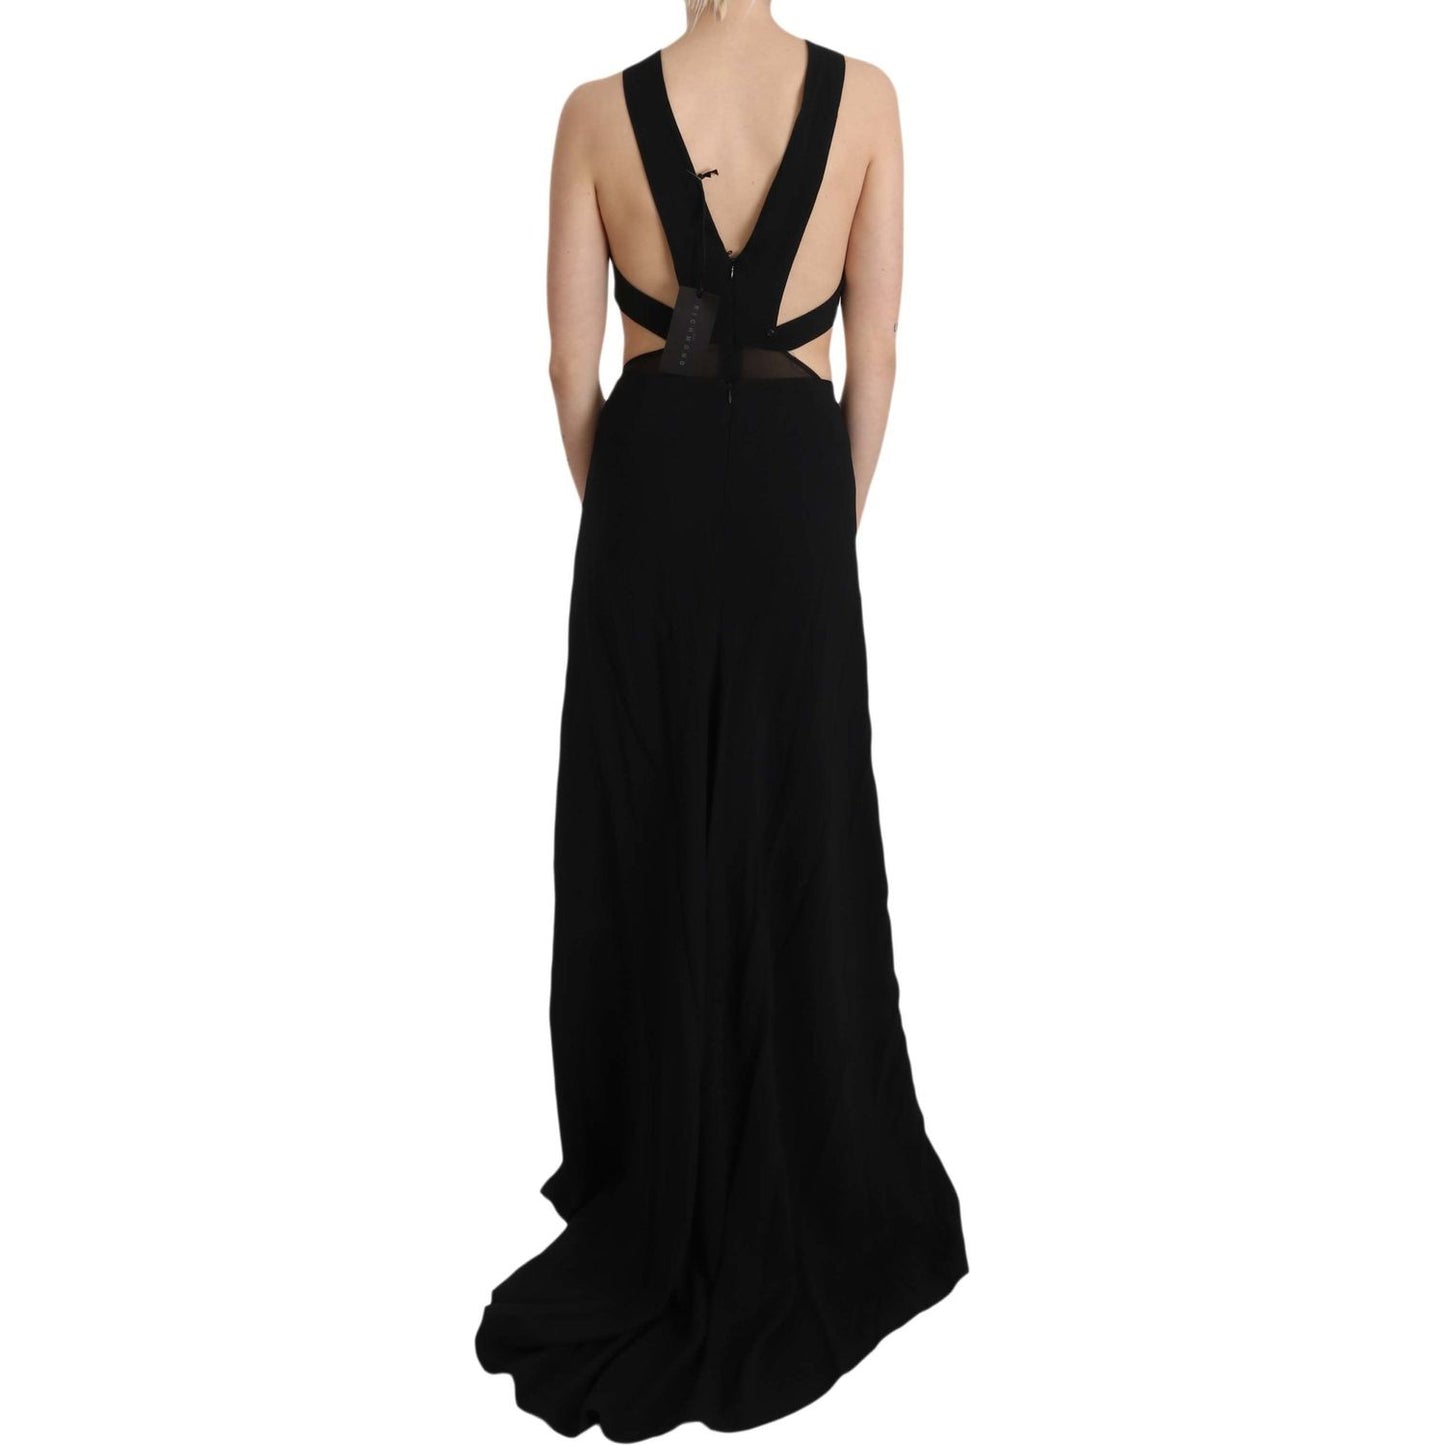 John Richmond Elegant Flare Maxi Evening Dress with Crystal Accents Dresses black-crystal-leather-gown-flare-dress